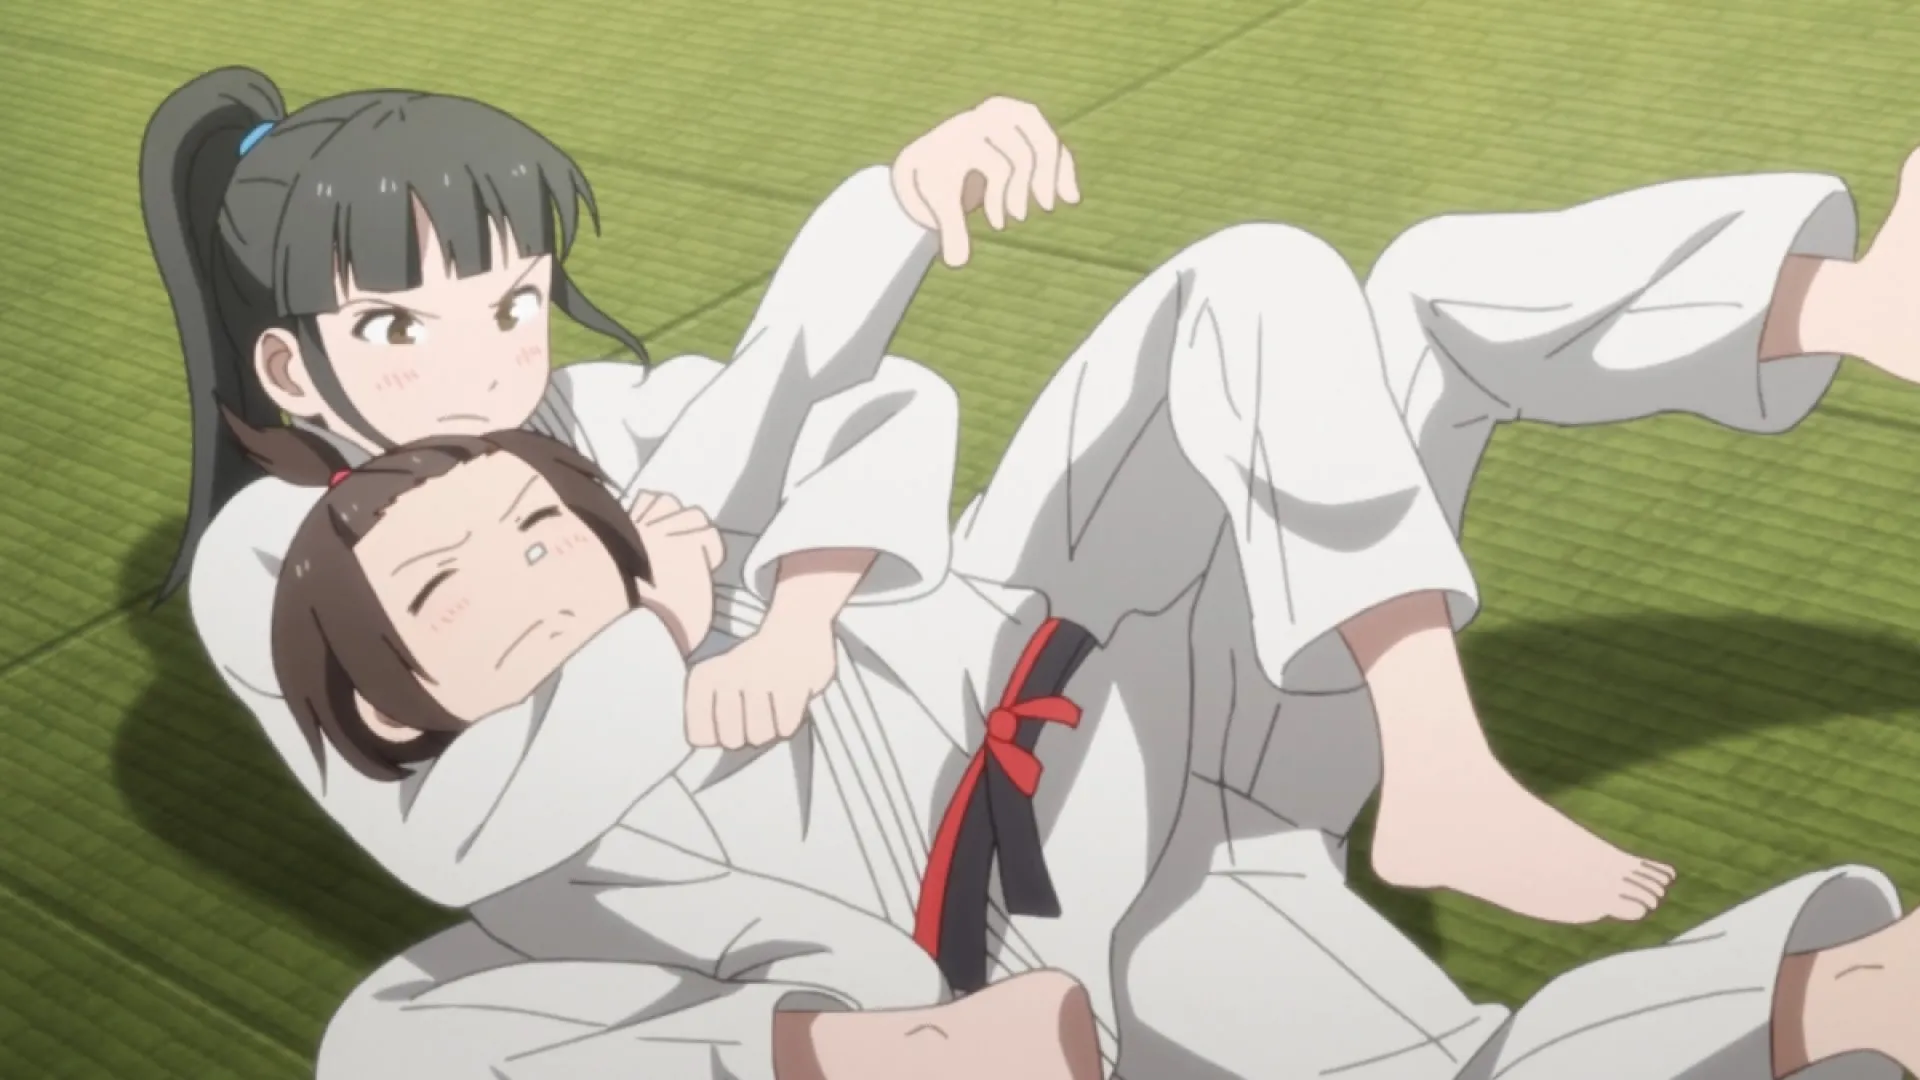 The girls of Ippon again duking it out